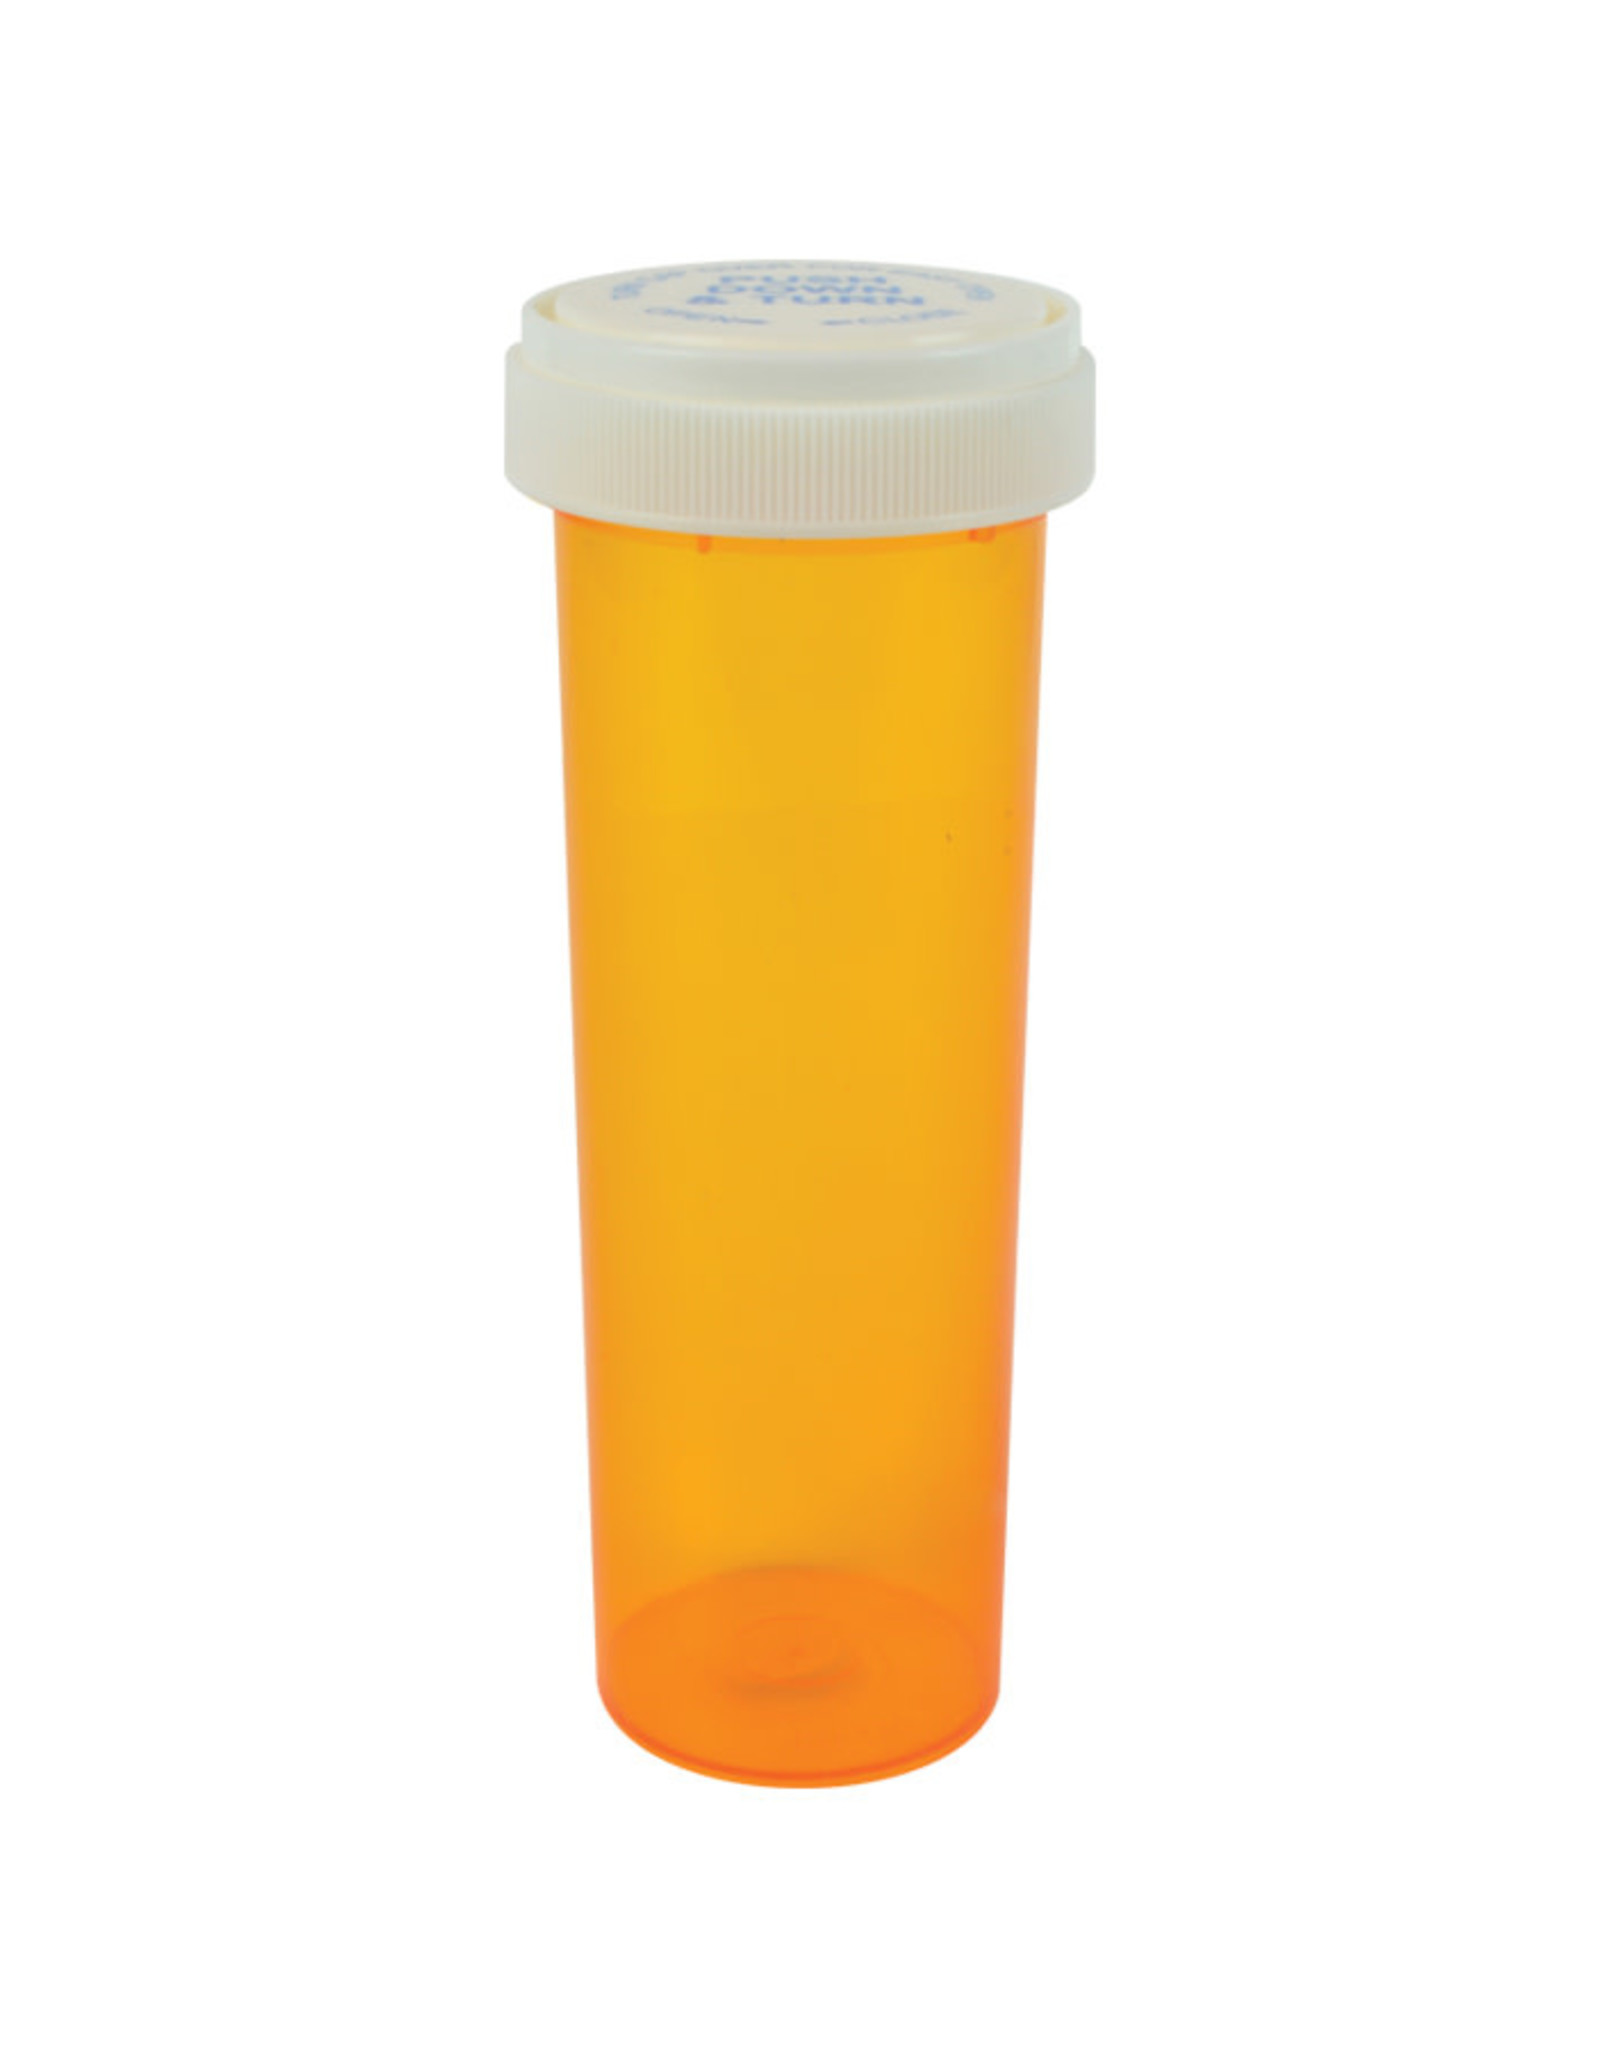 Pill Case - Large